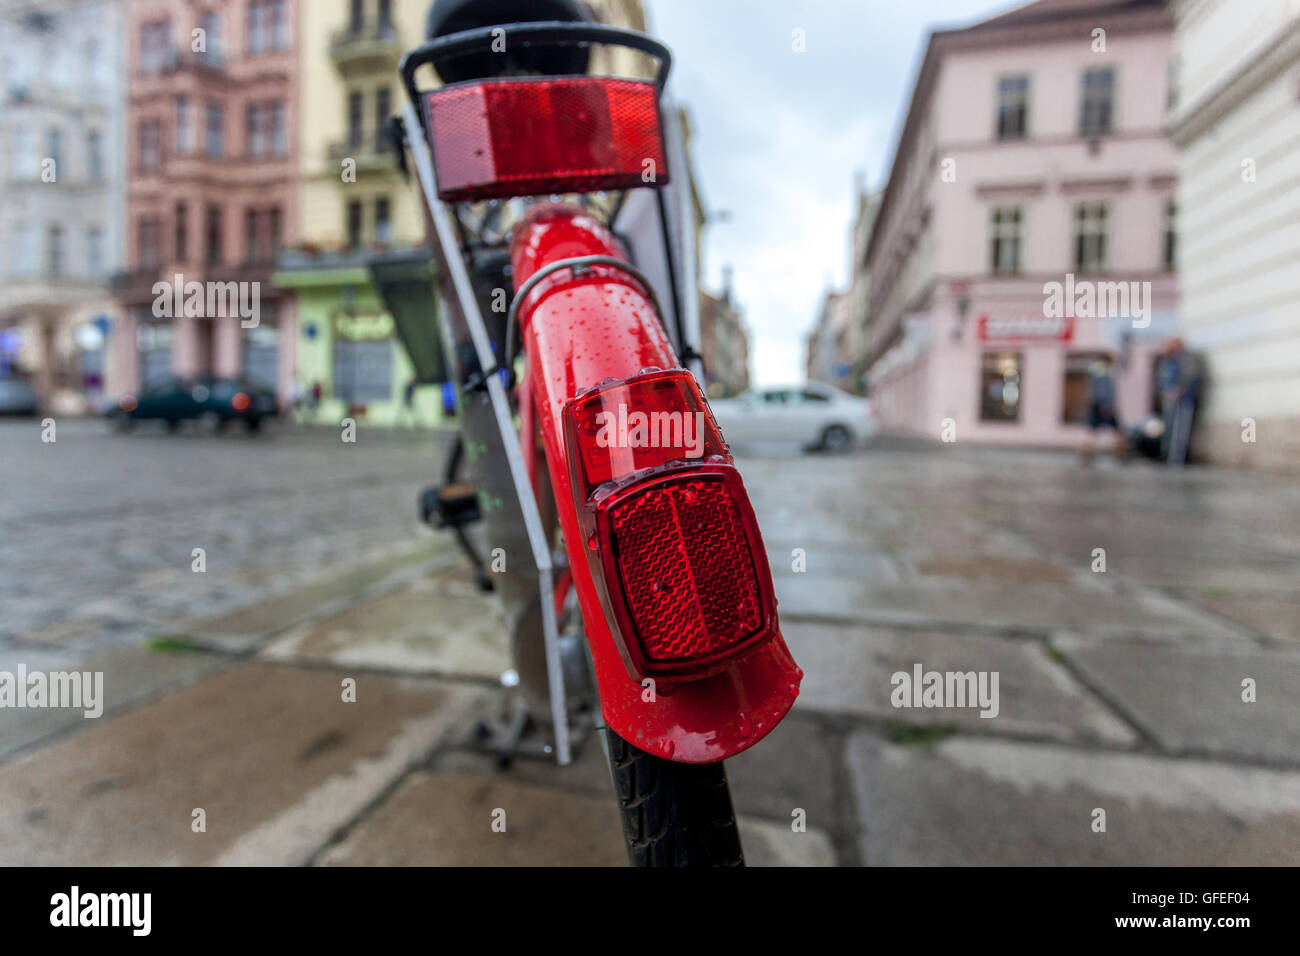 Bicycle with red fender. Square on a rainy day on city scenery Stock Photo